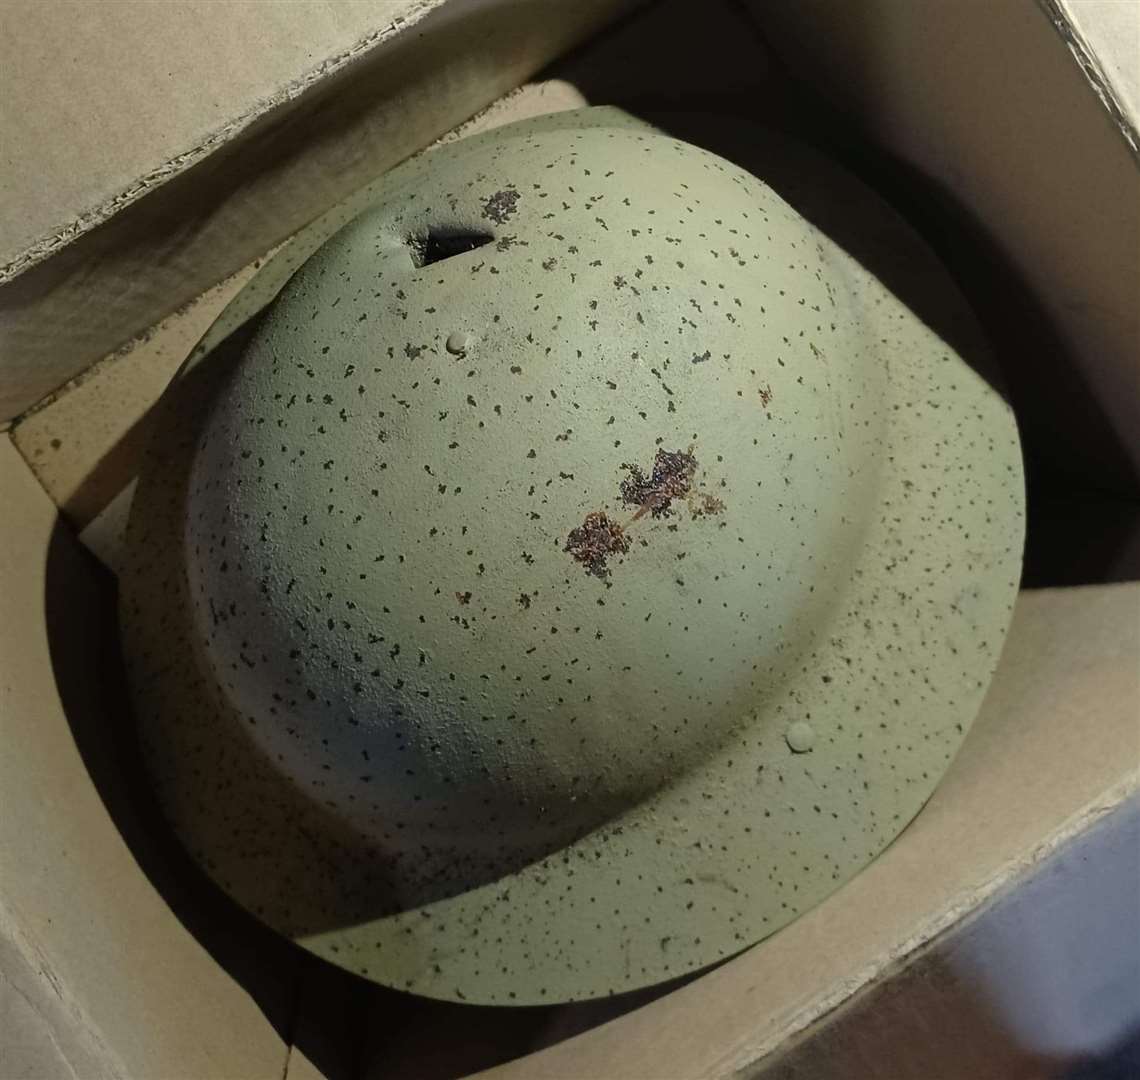 A bullet hole can be seen in the World War I helmet. Police are appealing for information on its whereabouts.